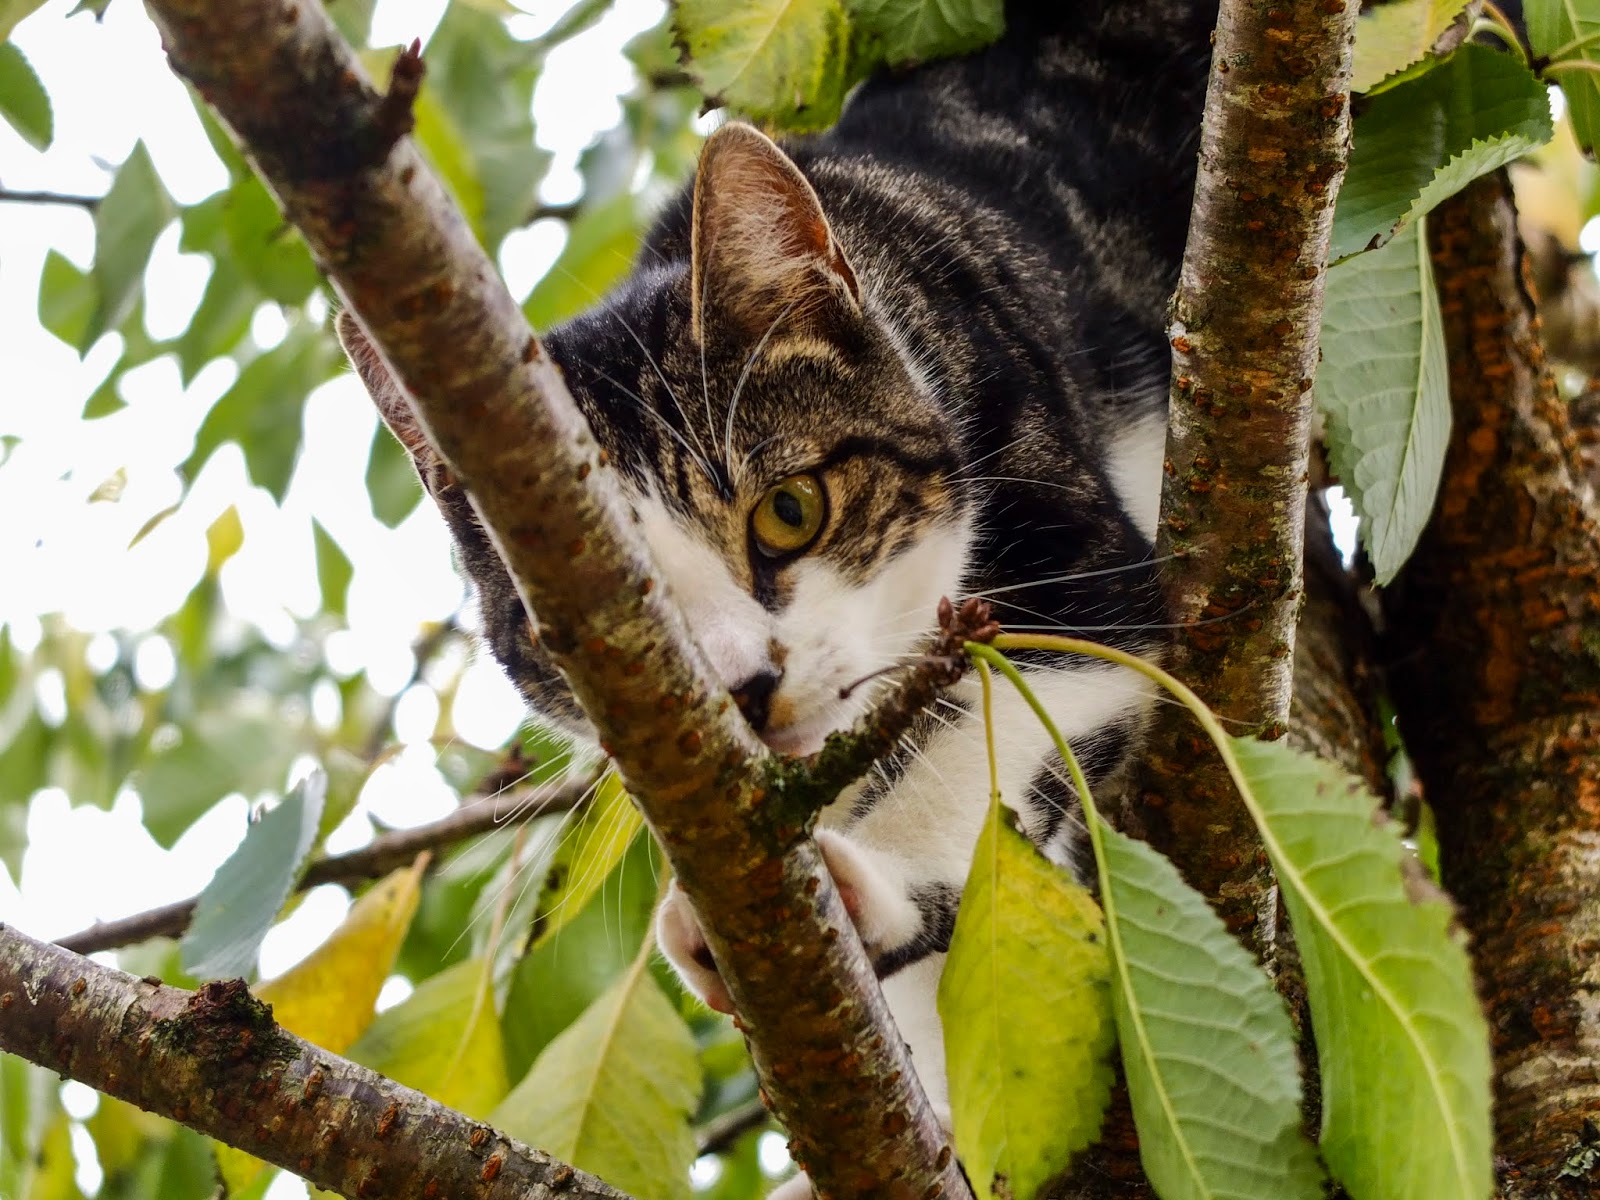 A cat in a tree looking down at the camera.